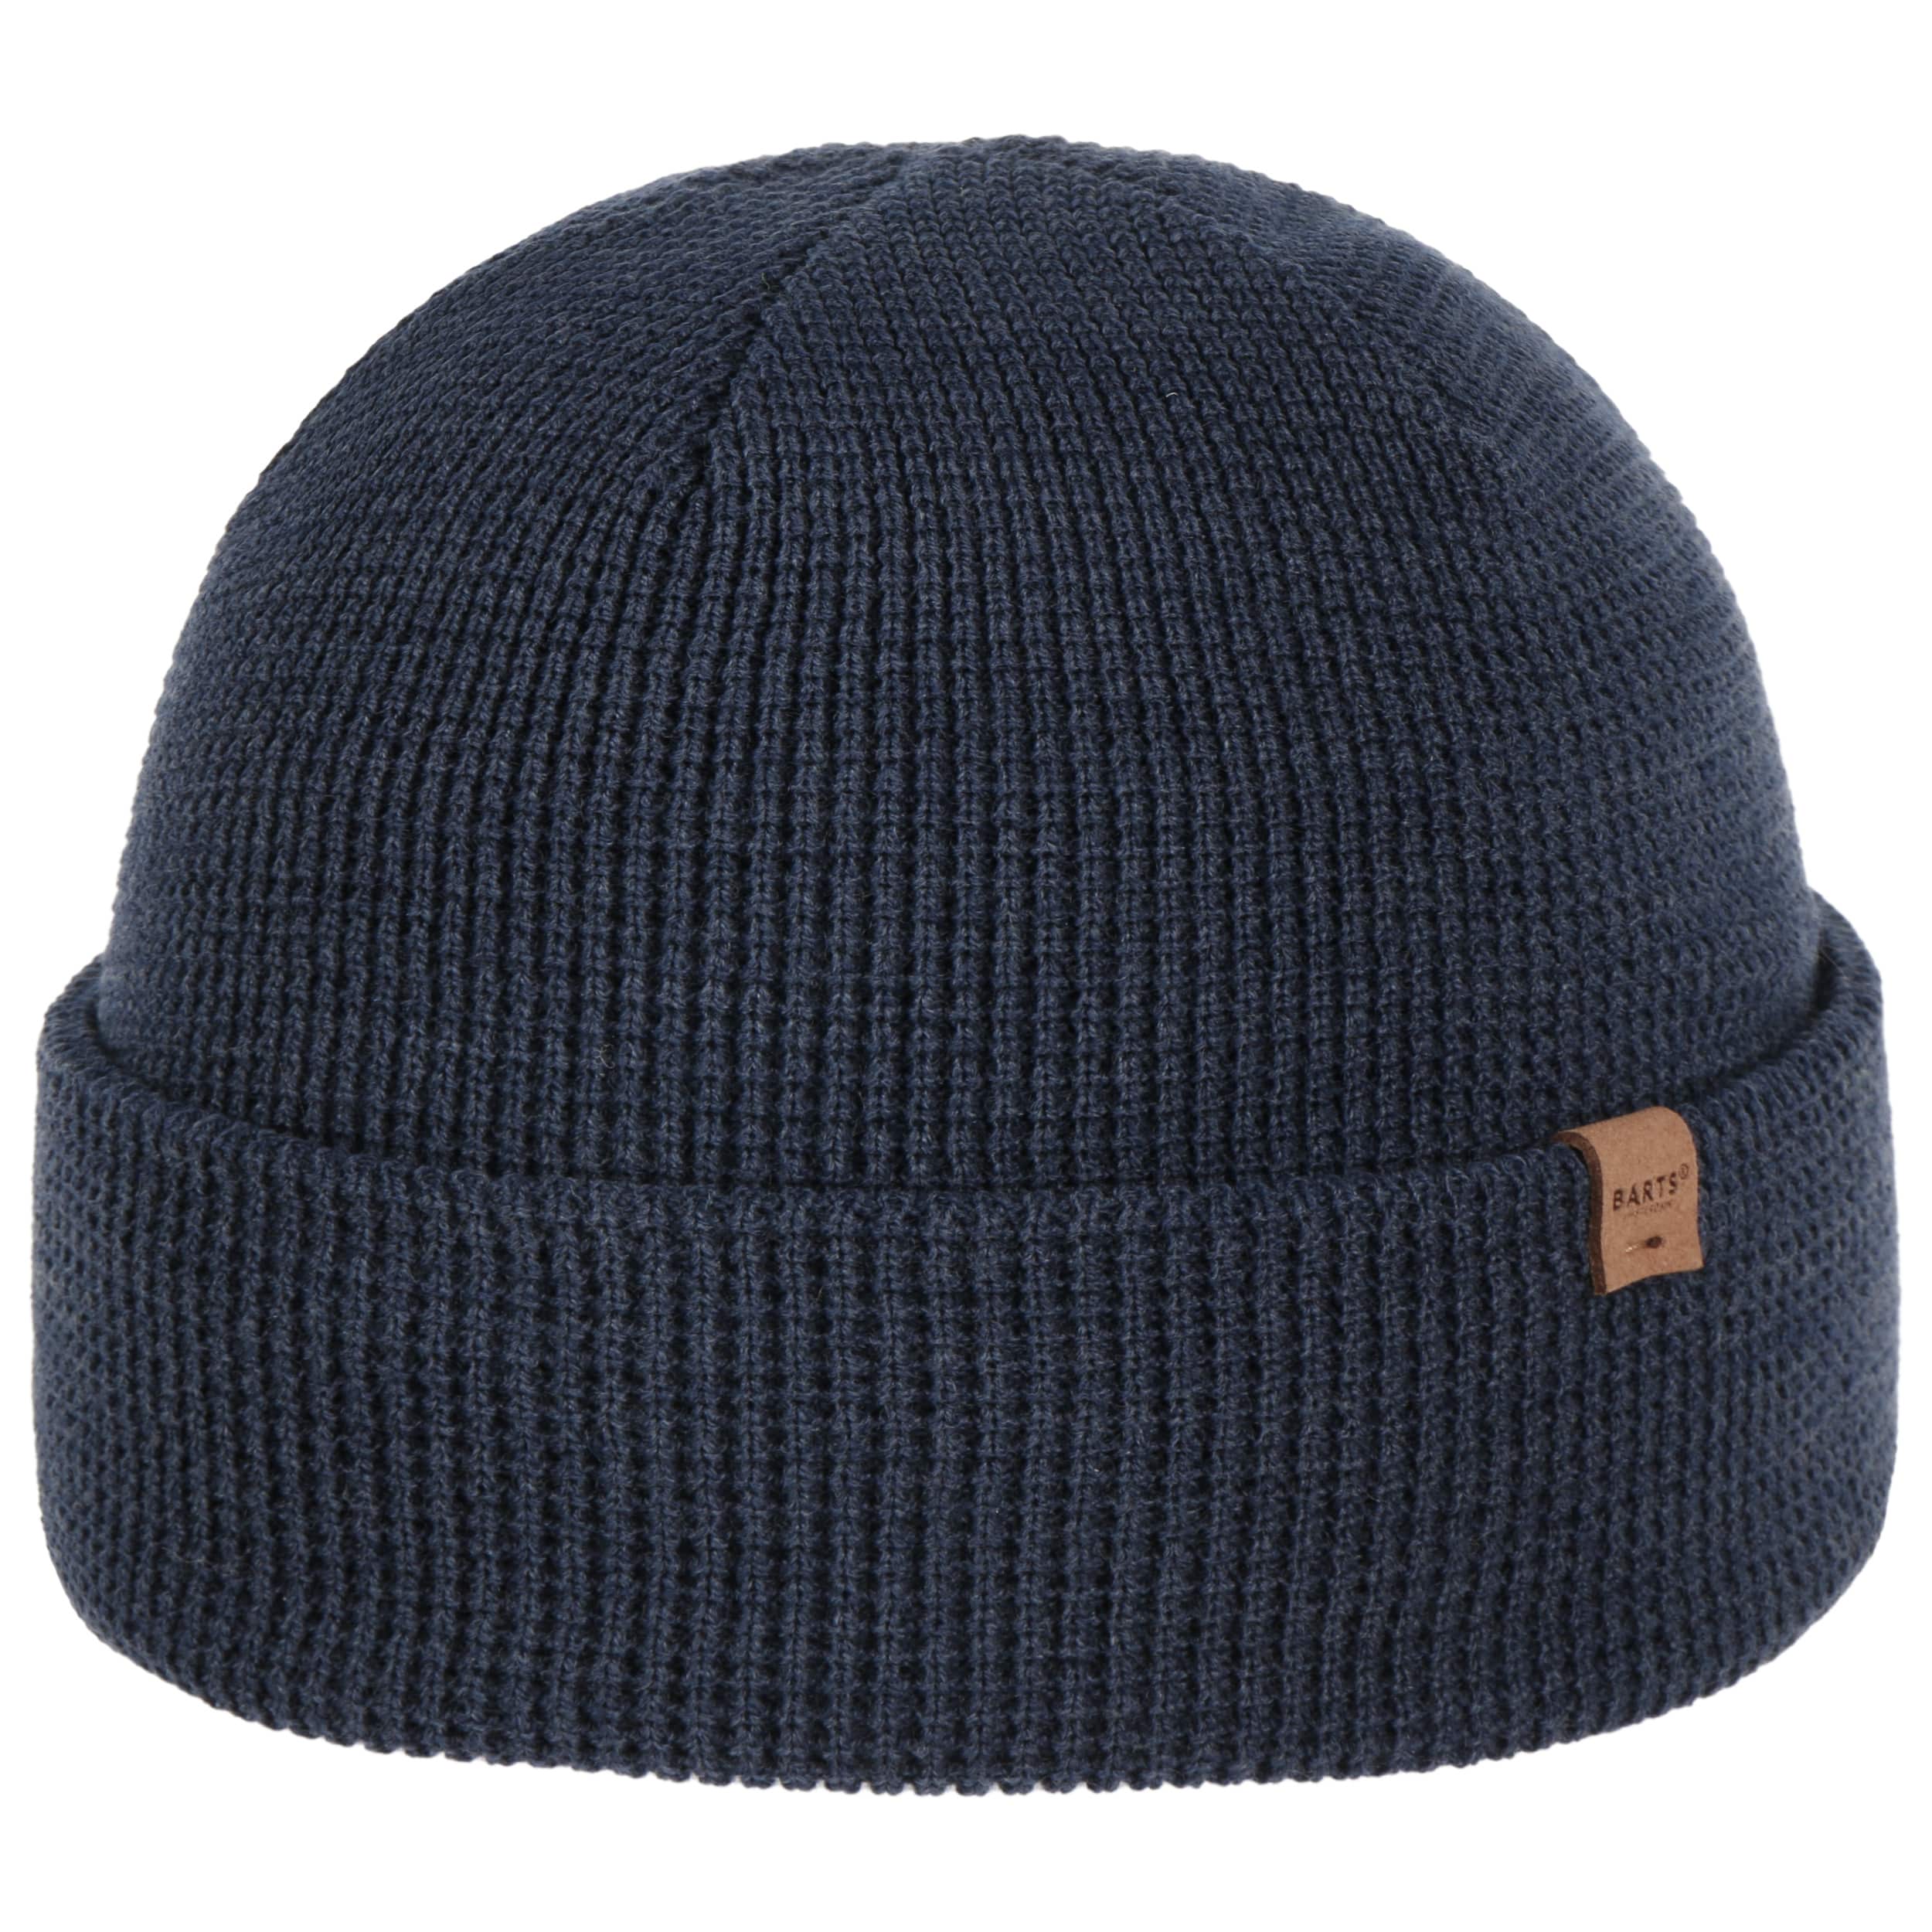 Coler Beanie Hat by 26,95 Barts € 